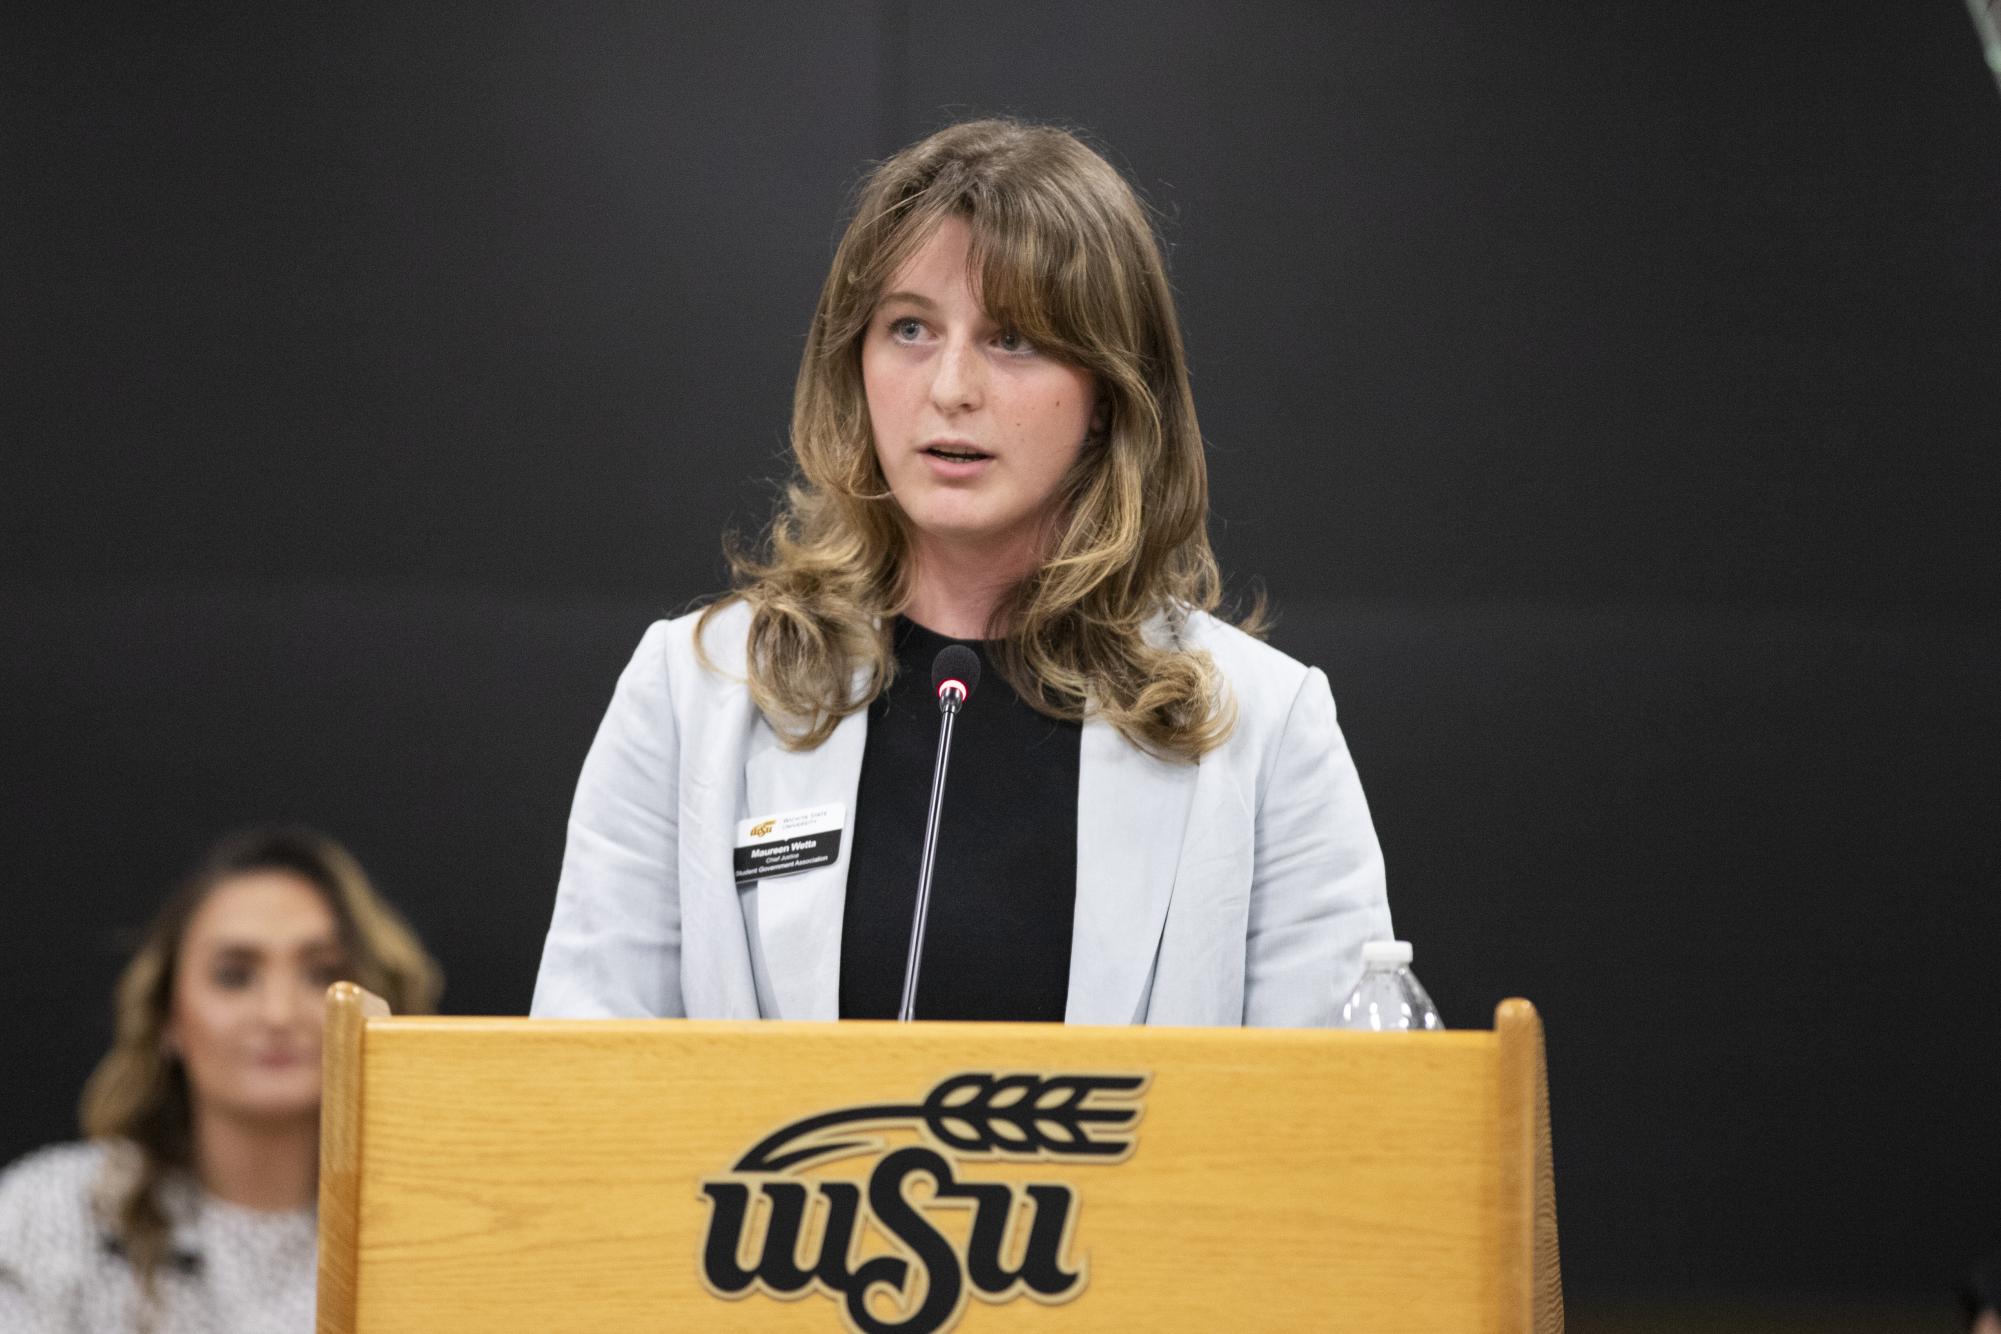 Chief Justice Maureen Wetta speaks to various people at Wichita State at the State of the Student Body on Sept. 6.